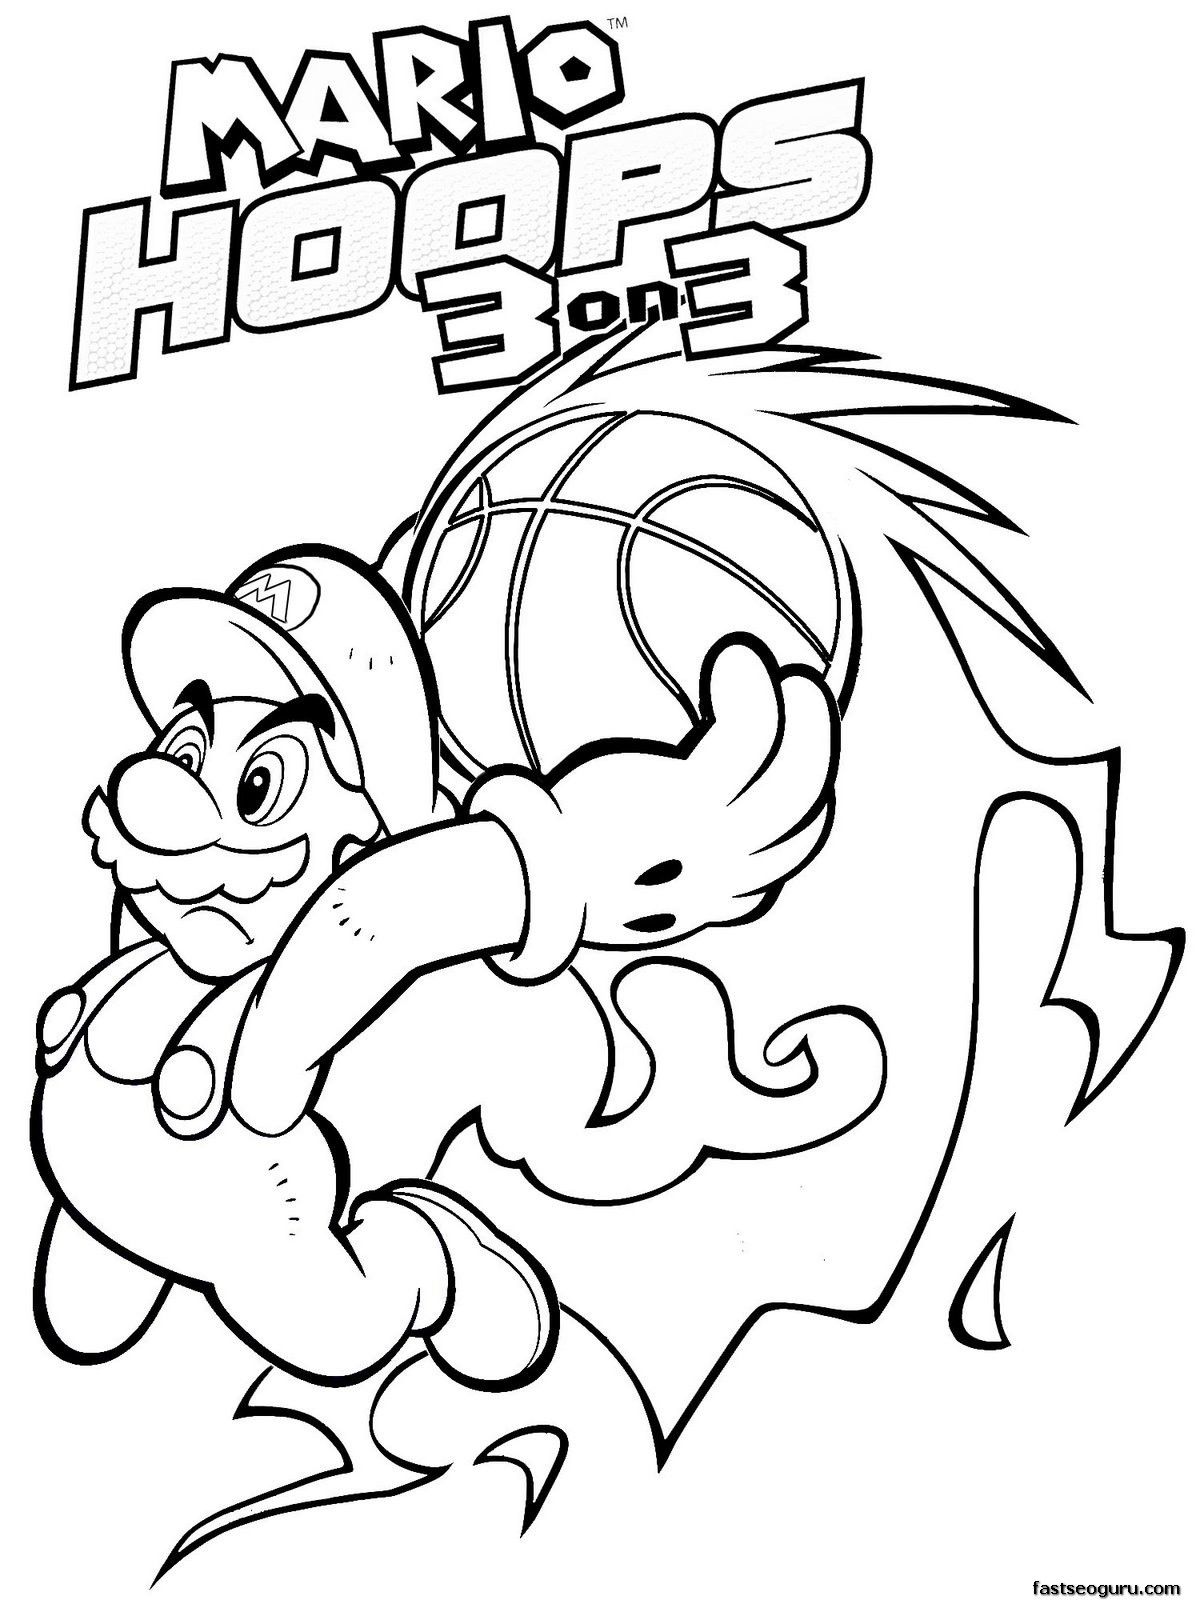 Coloring Pages Mario 3d World - Coloring Home